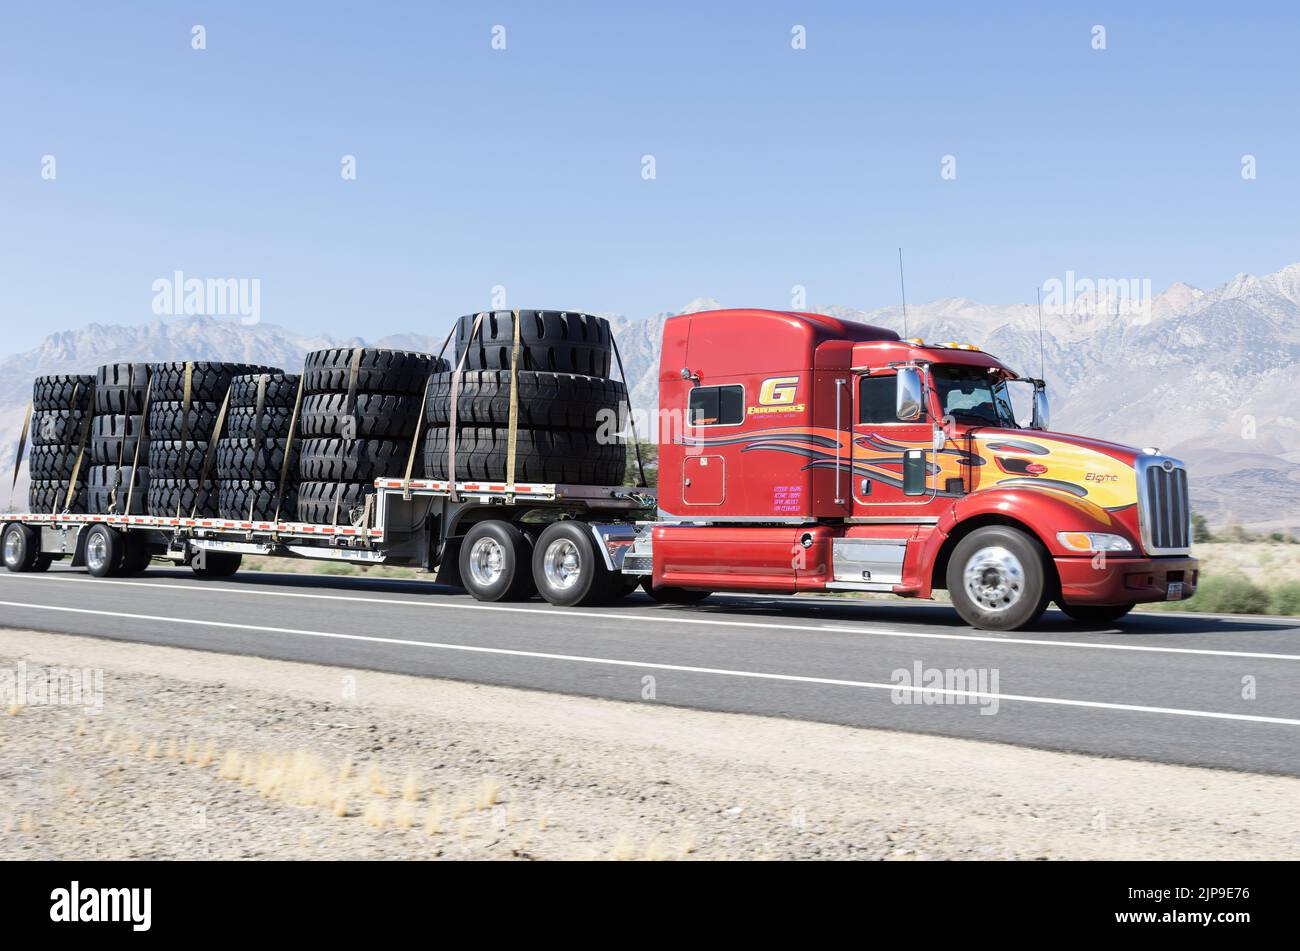 18-wheeler or semi truck shown hauling very large tires along Highway 395 near Lone Pine, Inyo County, California, USA. Stock Photo